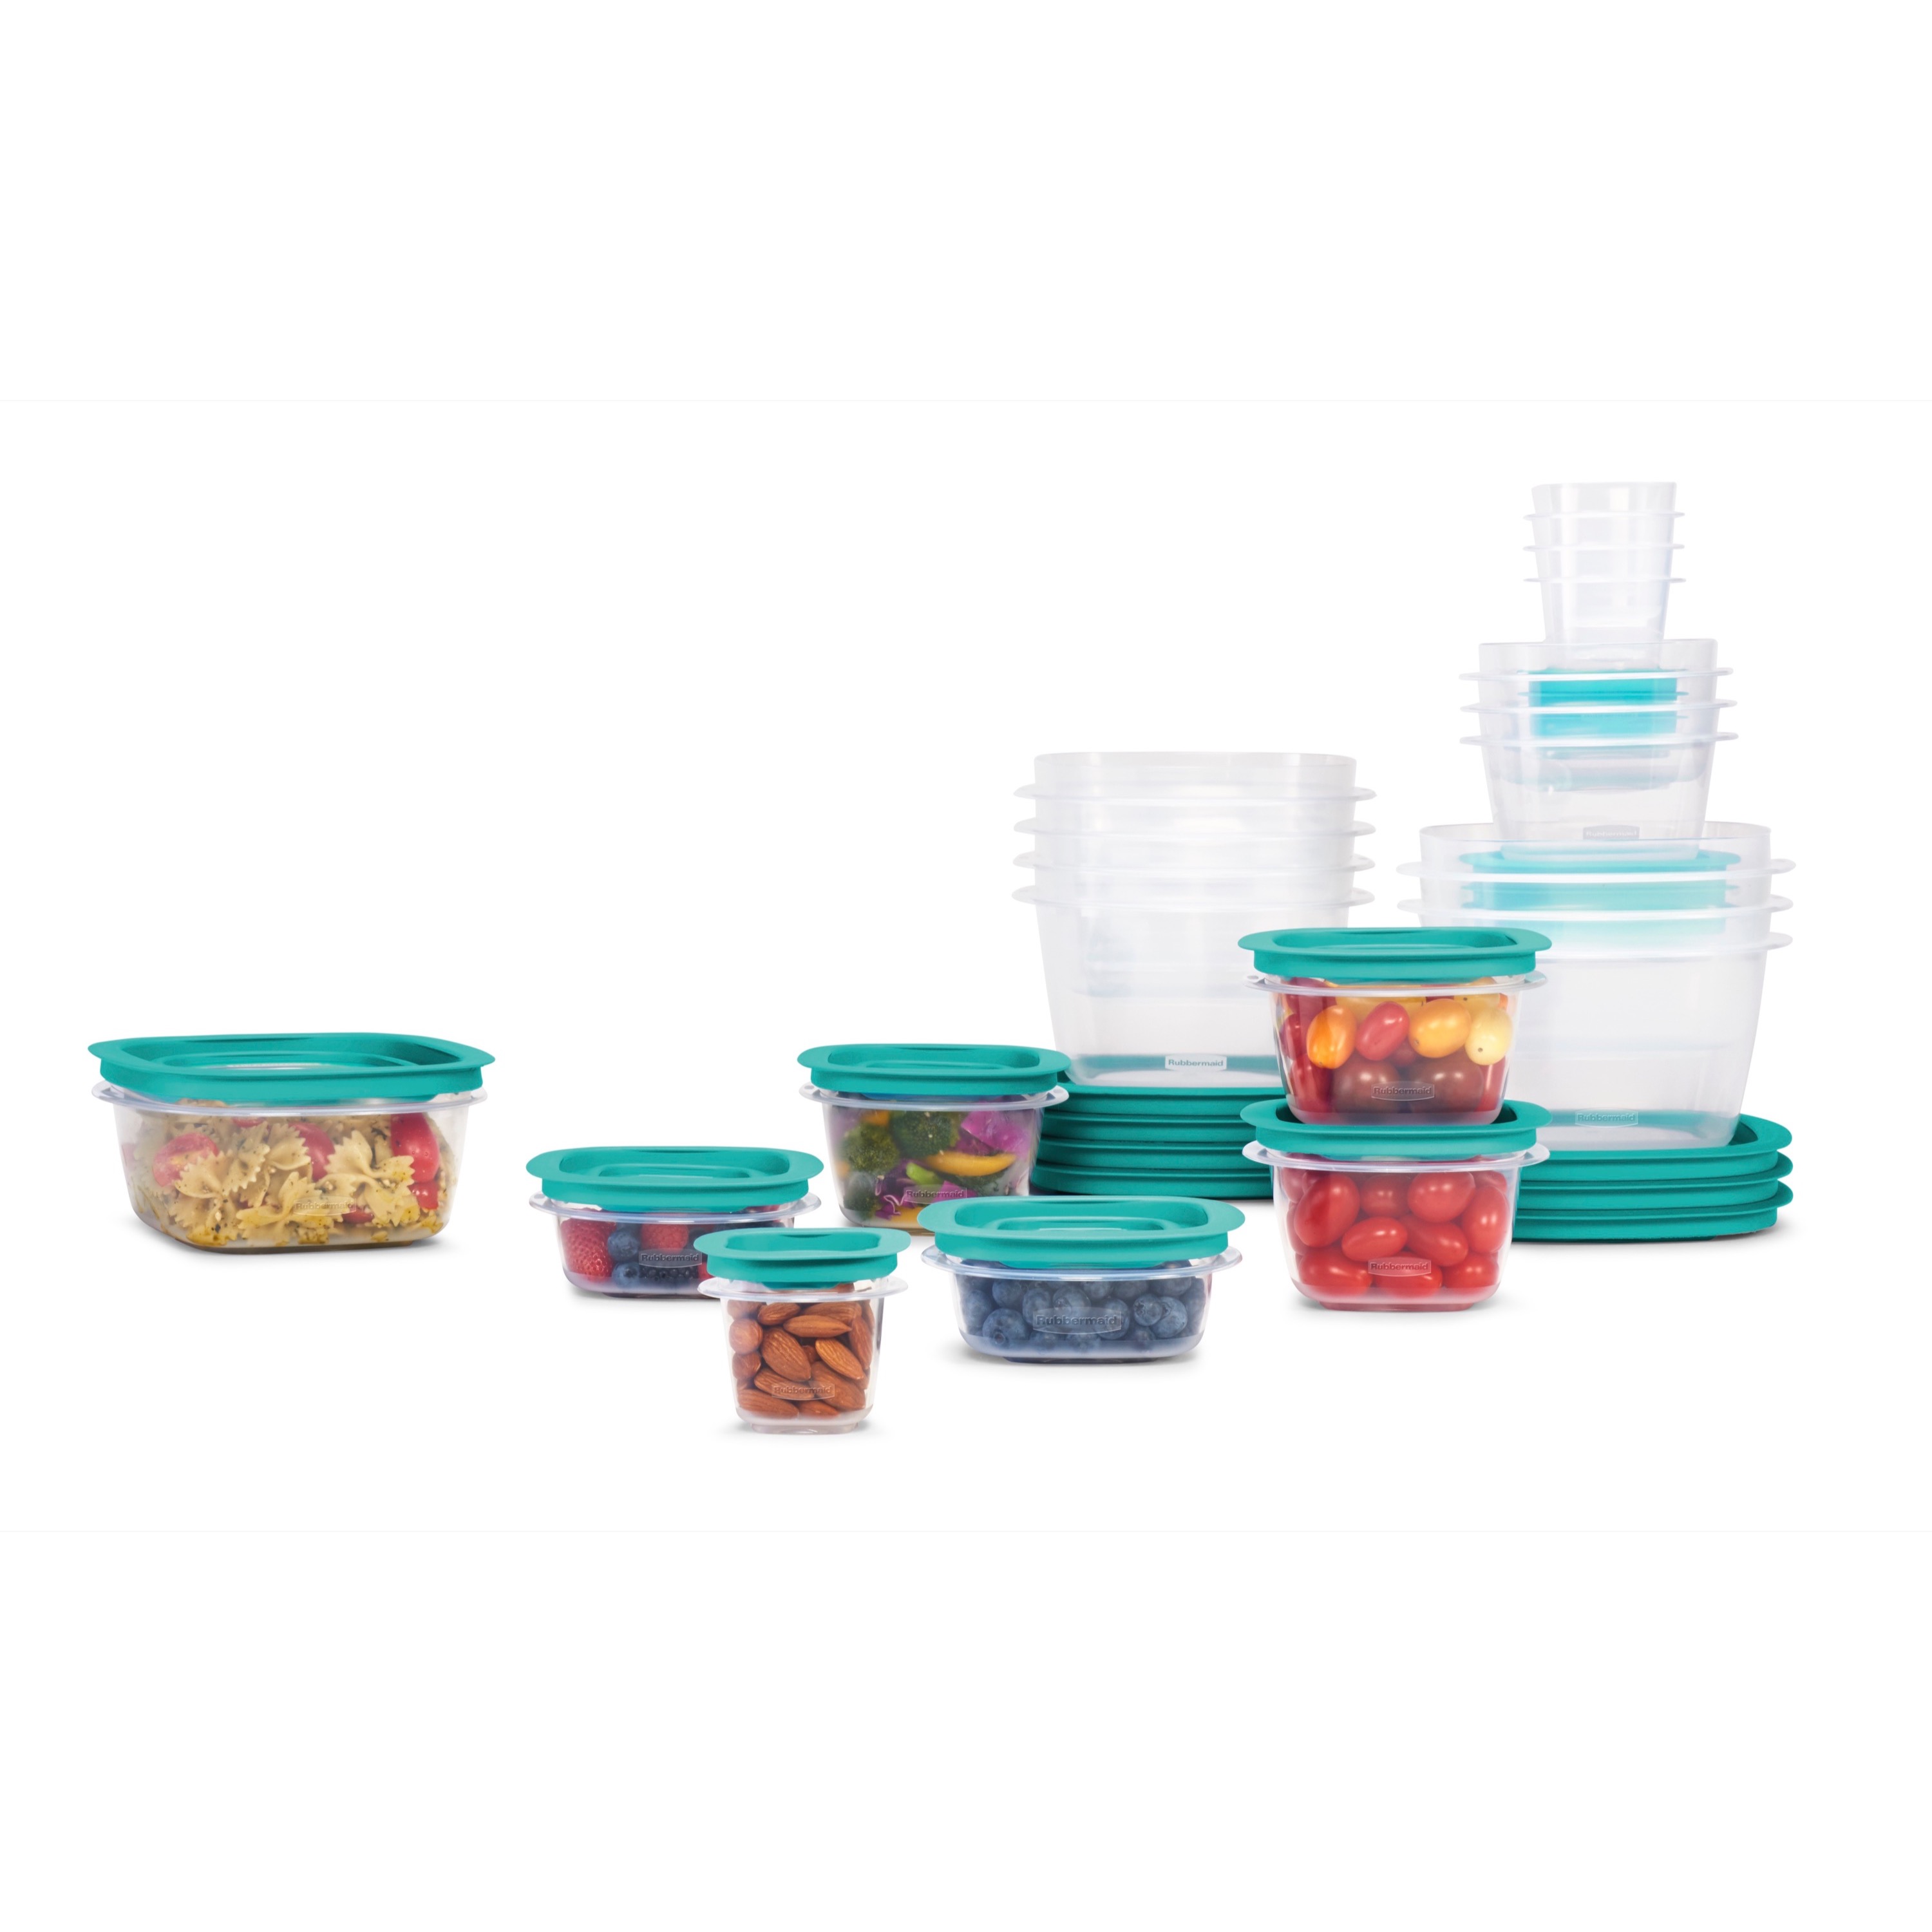 Rubbermaid Flex and Seal Set of 21 Variety Food Storage Containers, Teal Lids - image 1 of 14